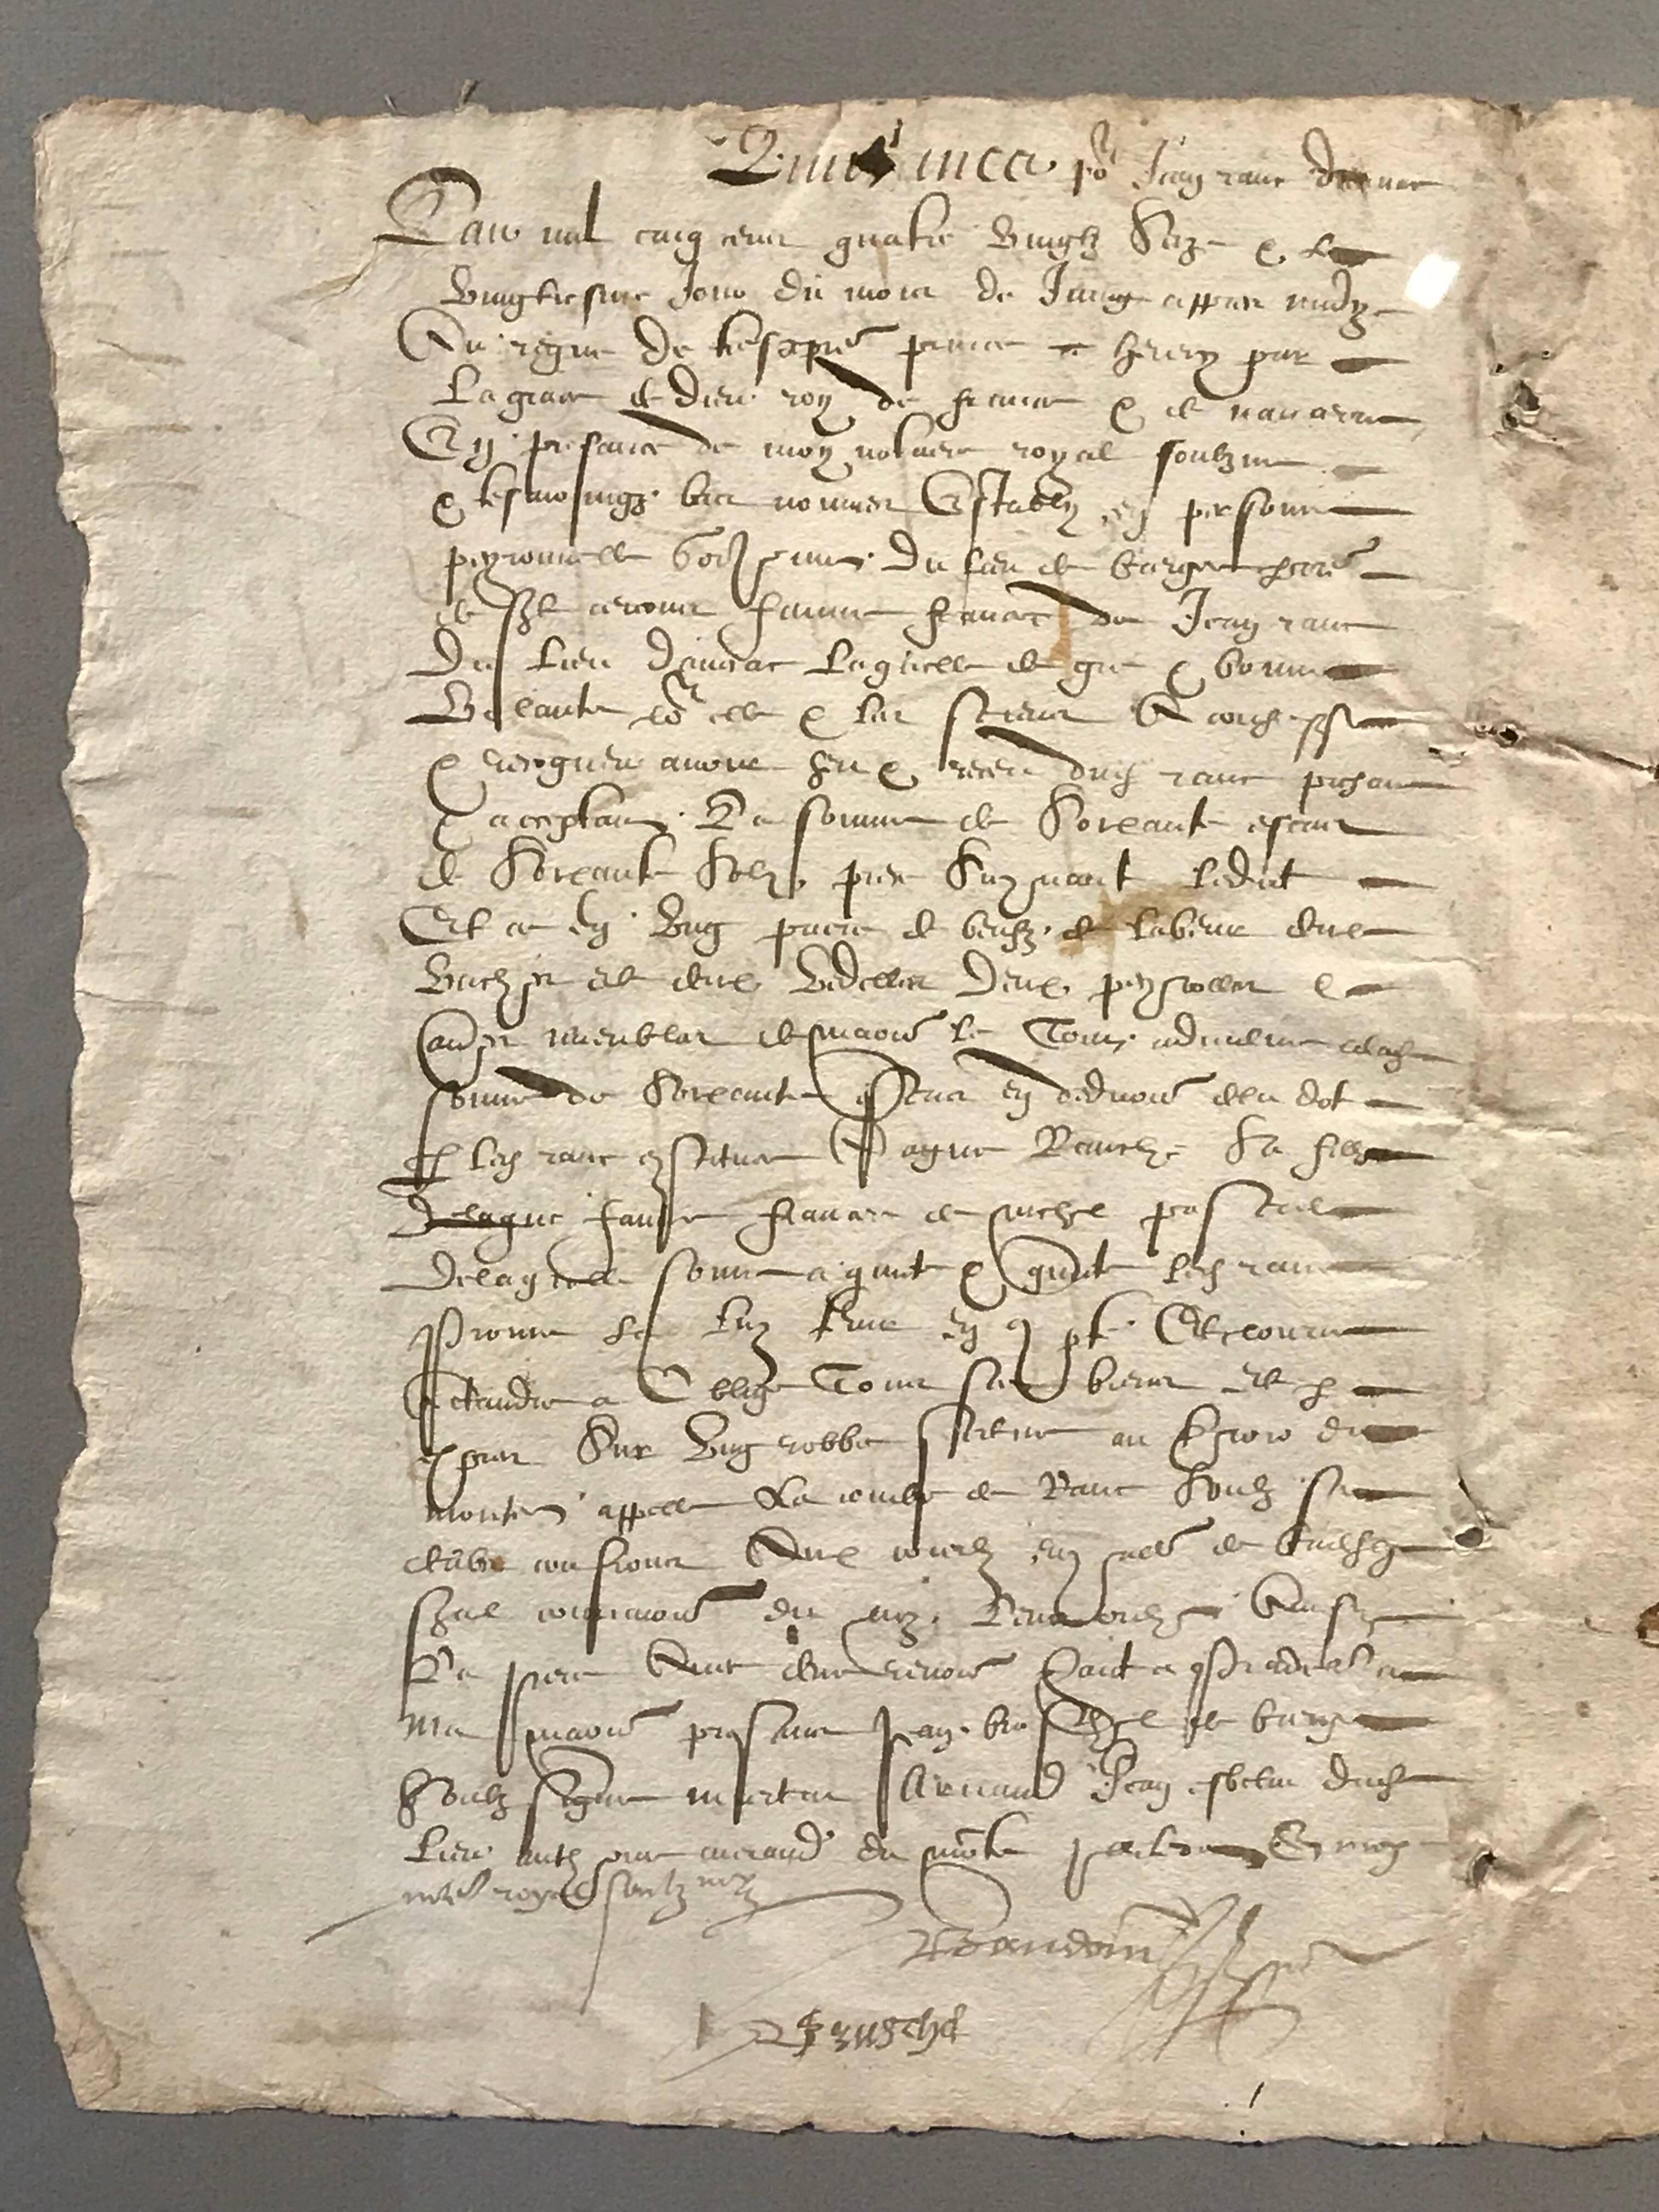 Very fine and rare original hand written French legal document, dated 1597. The item is both a fascinating historical artifact, but for todays interior it offers the ultimate in unique furnishing for your walls. 

This incredibly rare document is